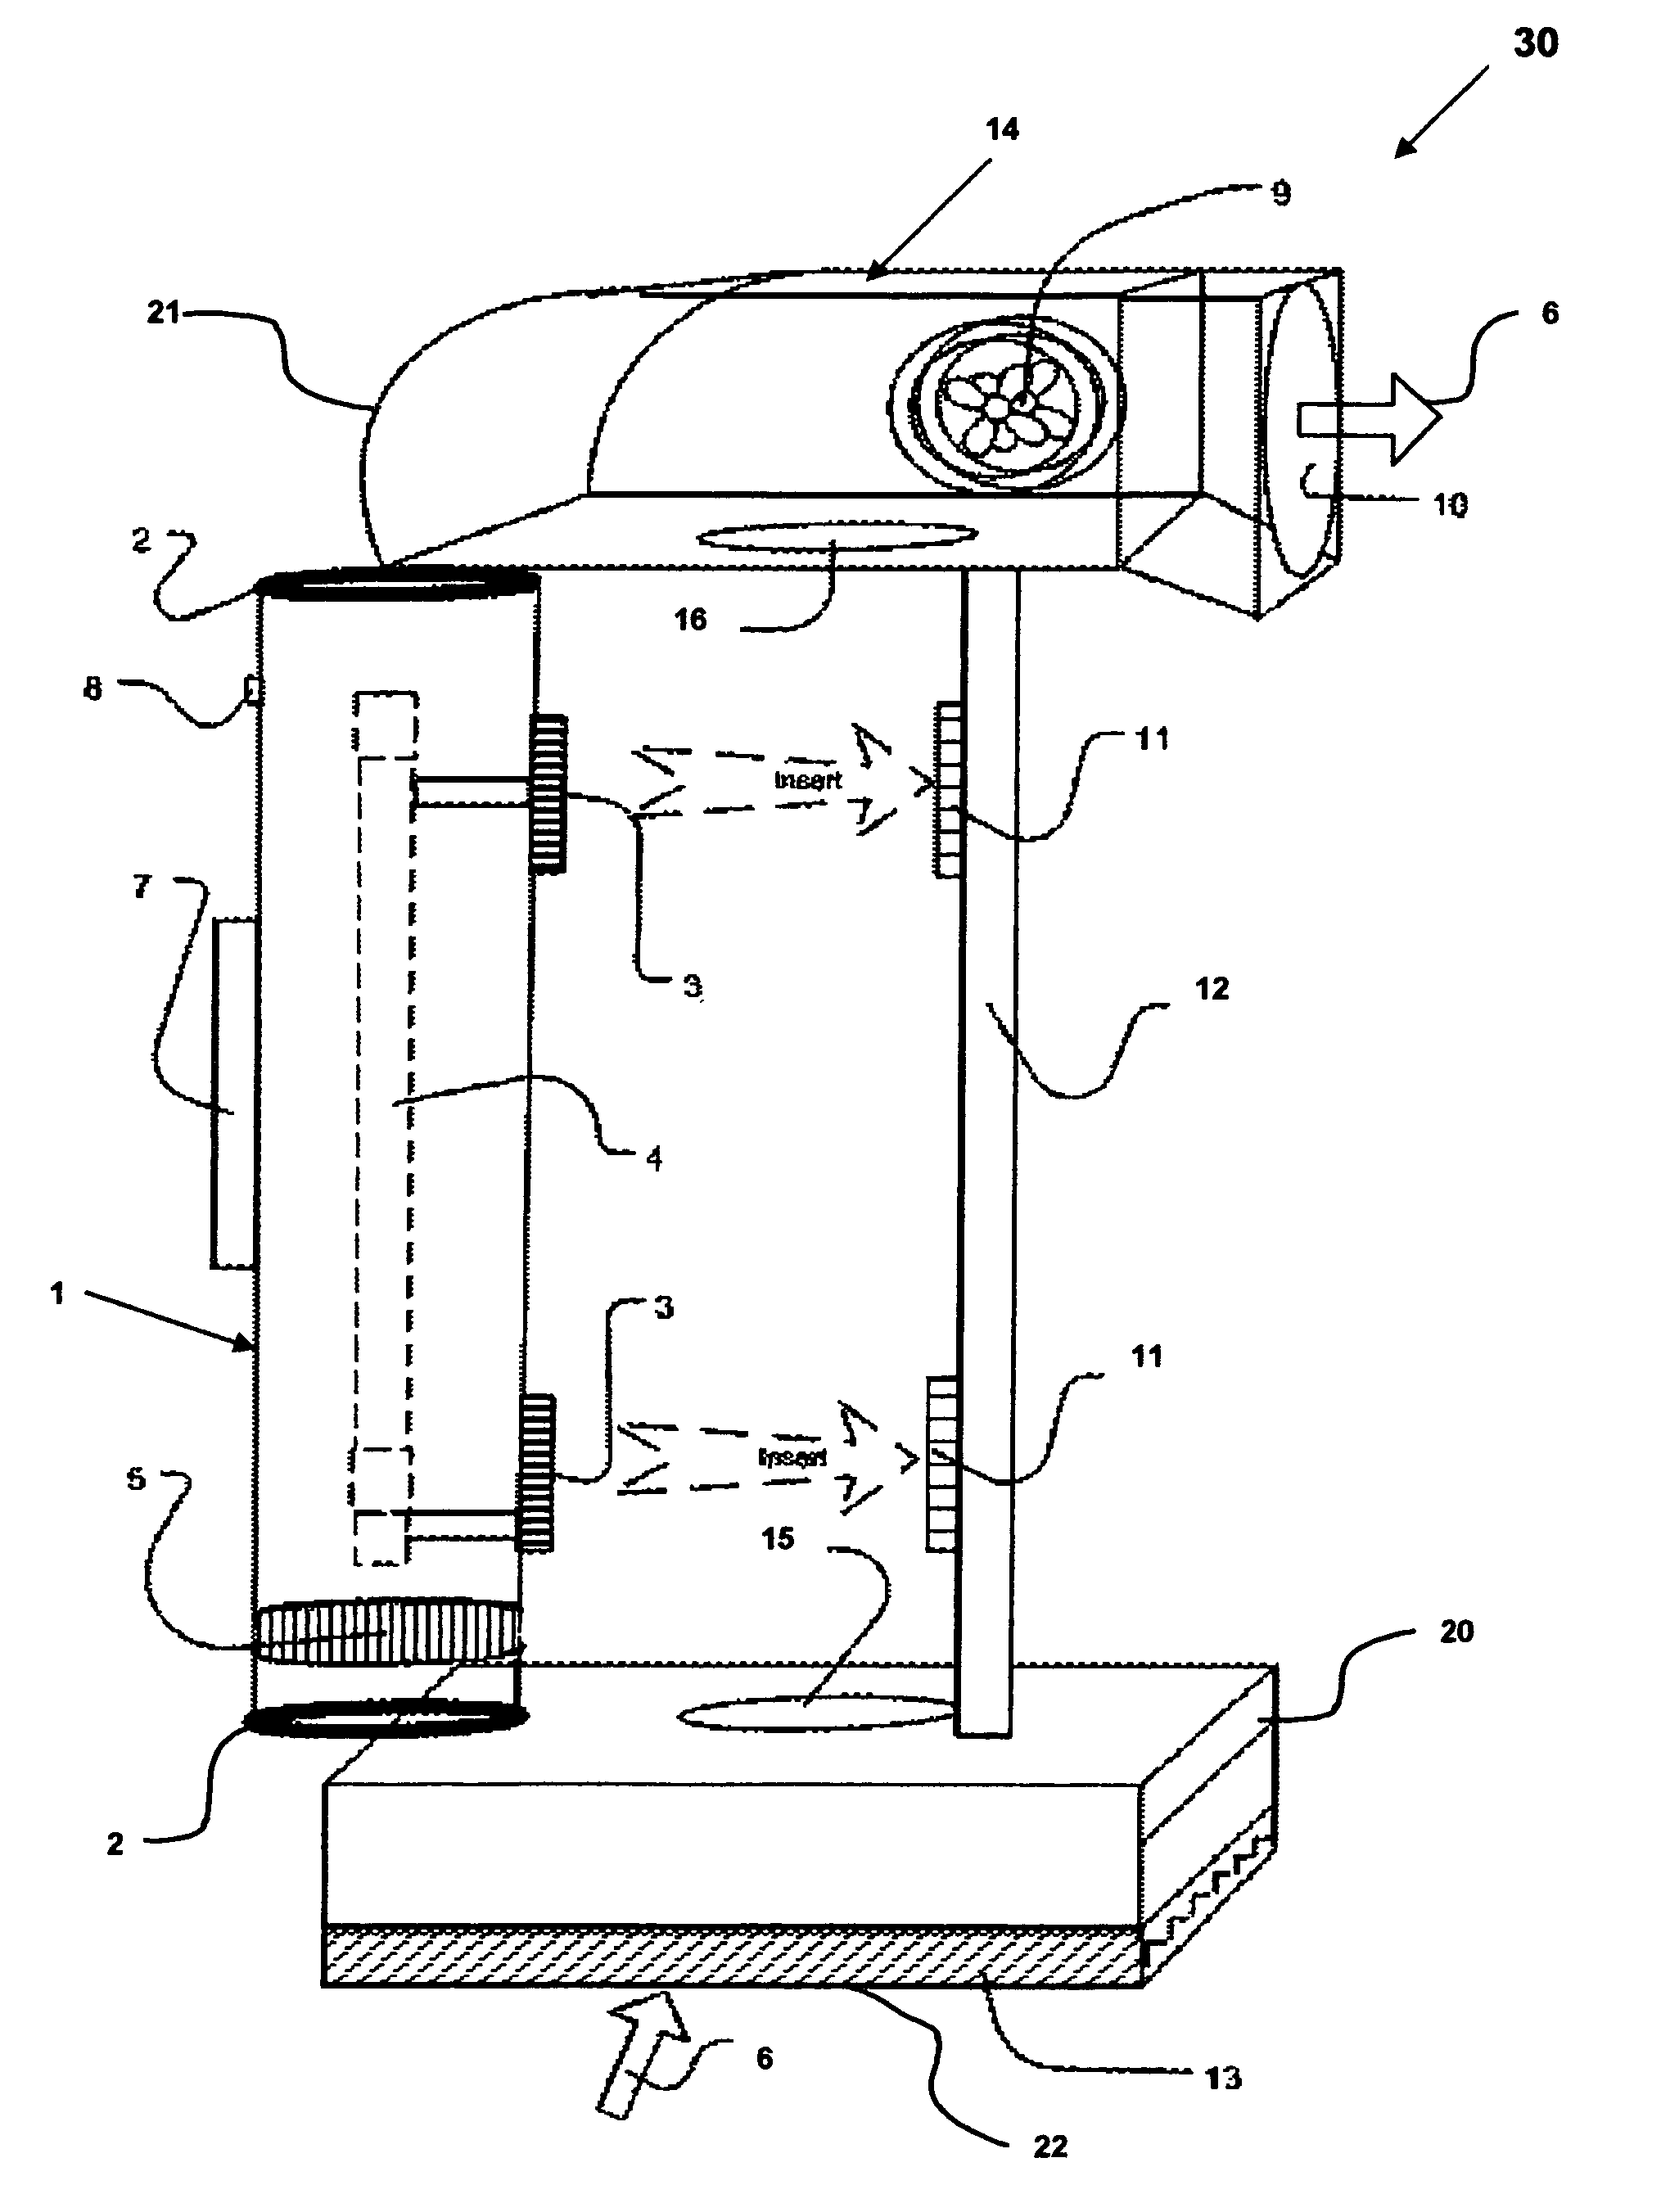 Air disinfecting system and cartridge device containing ultraviolet light